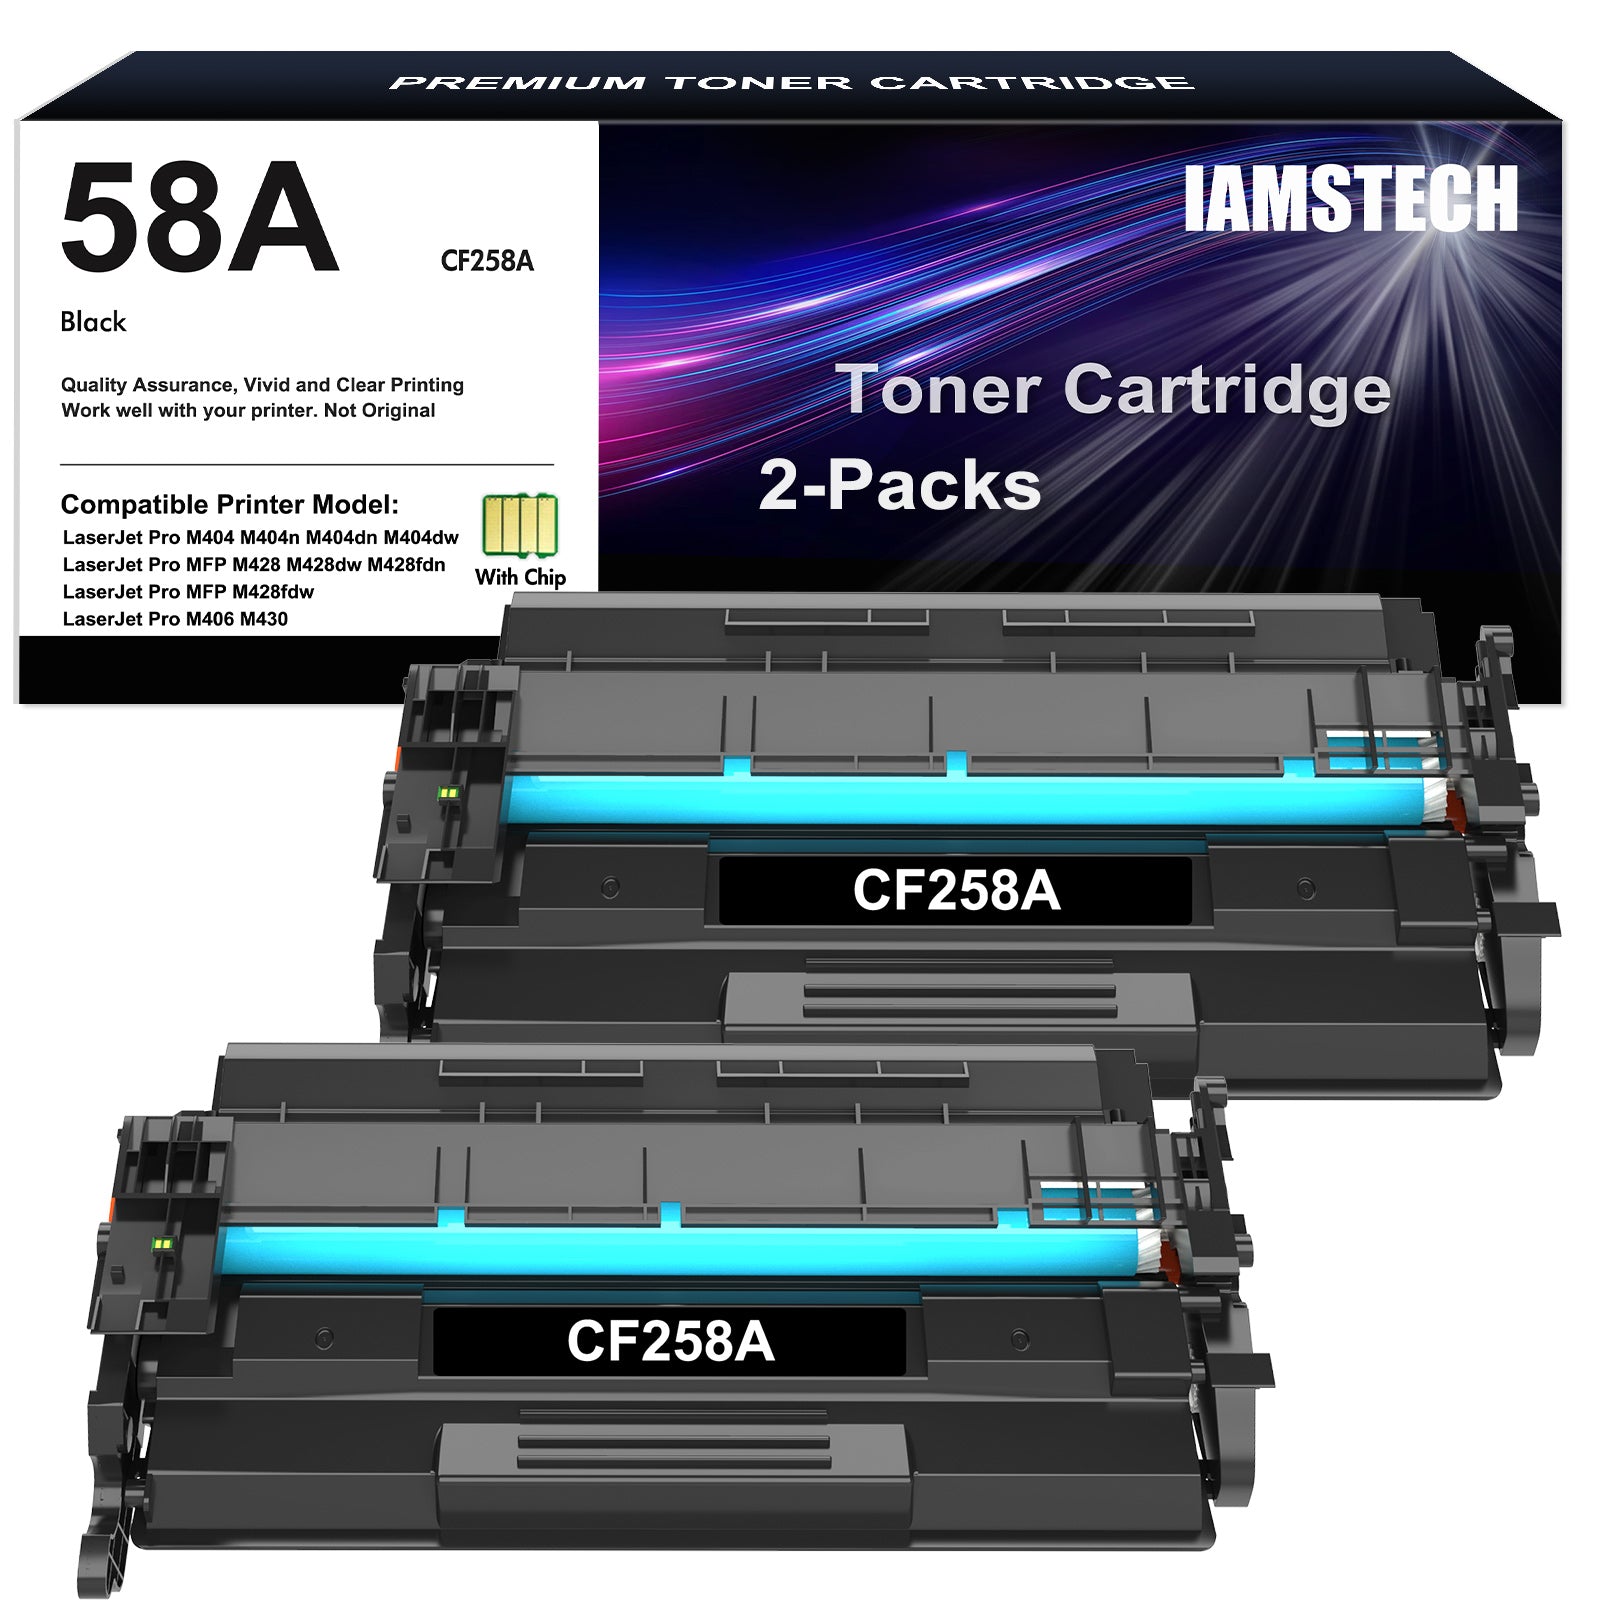 2-pack 58A CF258A Black Toner cartridge with Chip,Compatible with HP 58A CF258A m404 Toner cartridge,for HP Laserjet Pro M404n M404dn MFP M428fdw M428fdn M404dw M428dw Printer